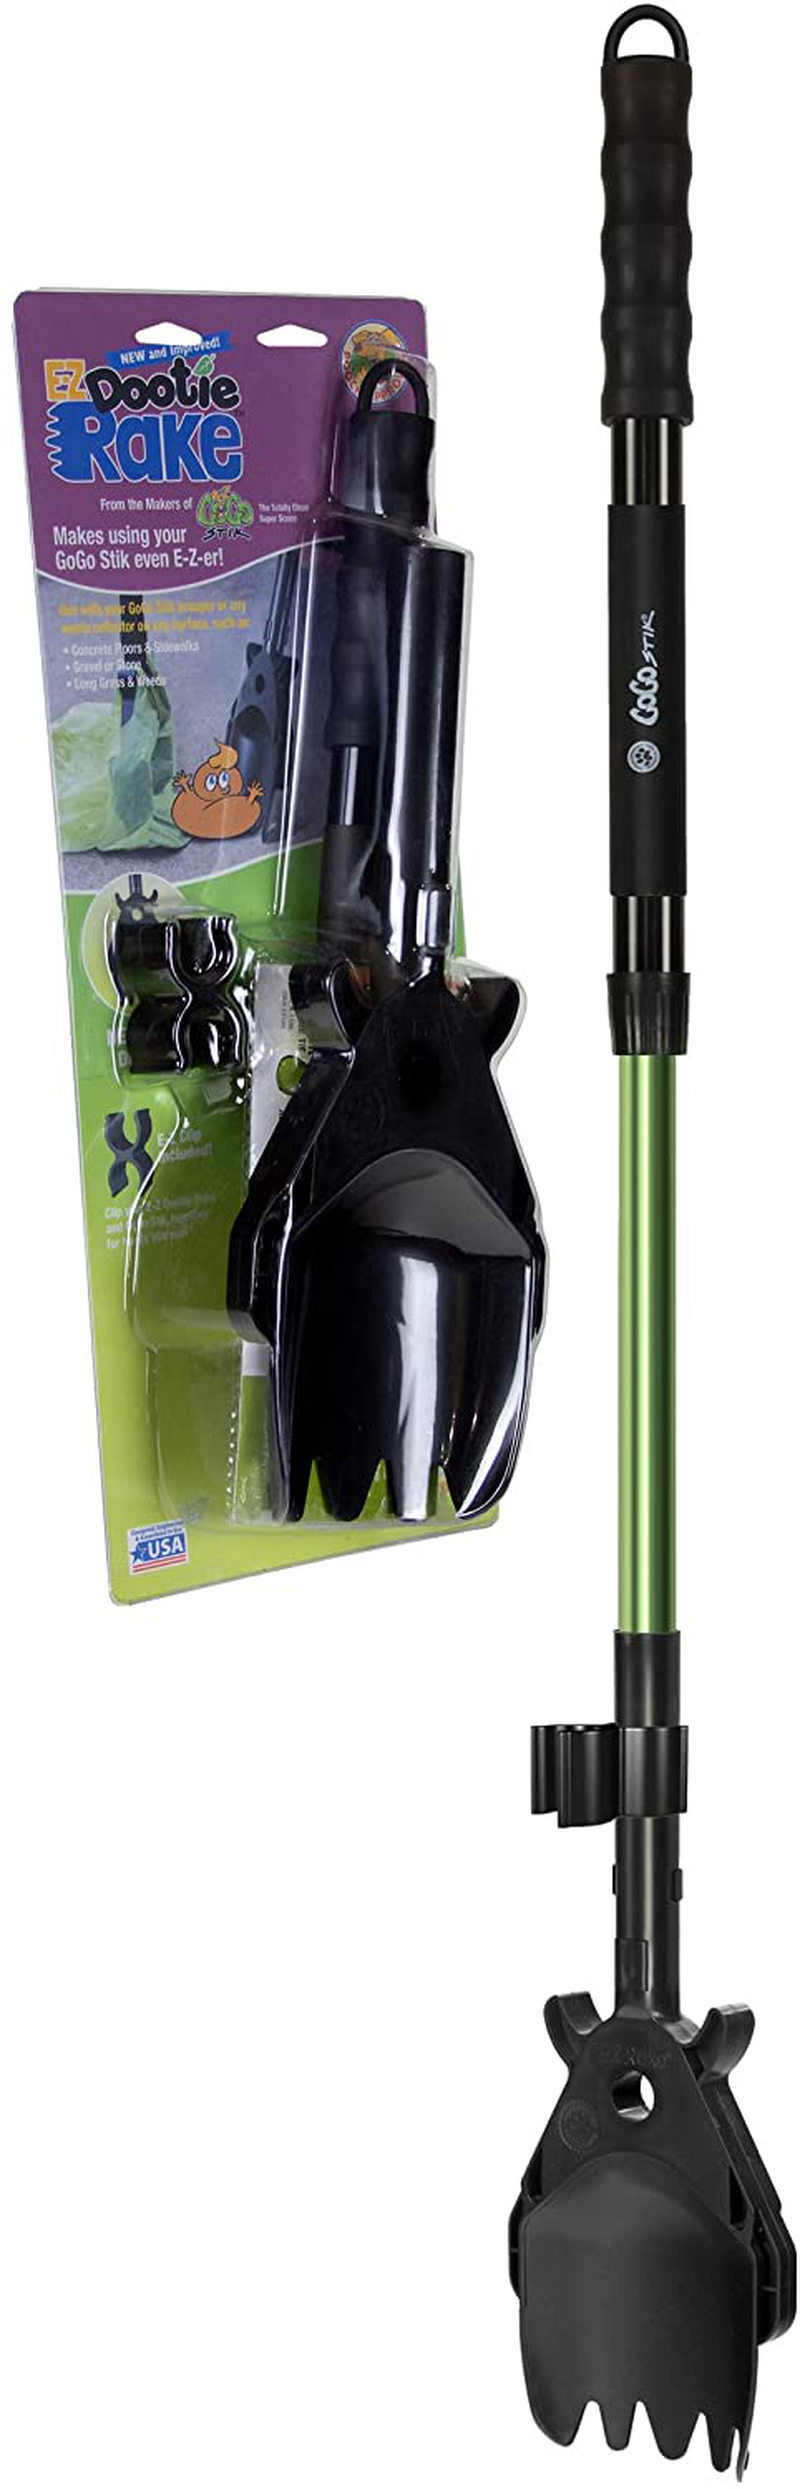 GoGo Stik, The Totally Clean Pooper Scooper. 24 to 36 inch. Small to Large Dogs. ST or XP Model Scooper. Optional EZ Wedge (Like rake). Or Scoop Set Combo. Use Store Bags Dootie Bags. Animals & Pet Supplies > Pet Supplies > Dog Supplies GoGo Stik DOOTIE RAKE 37"  